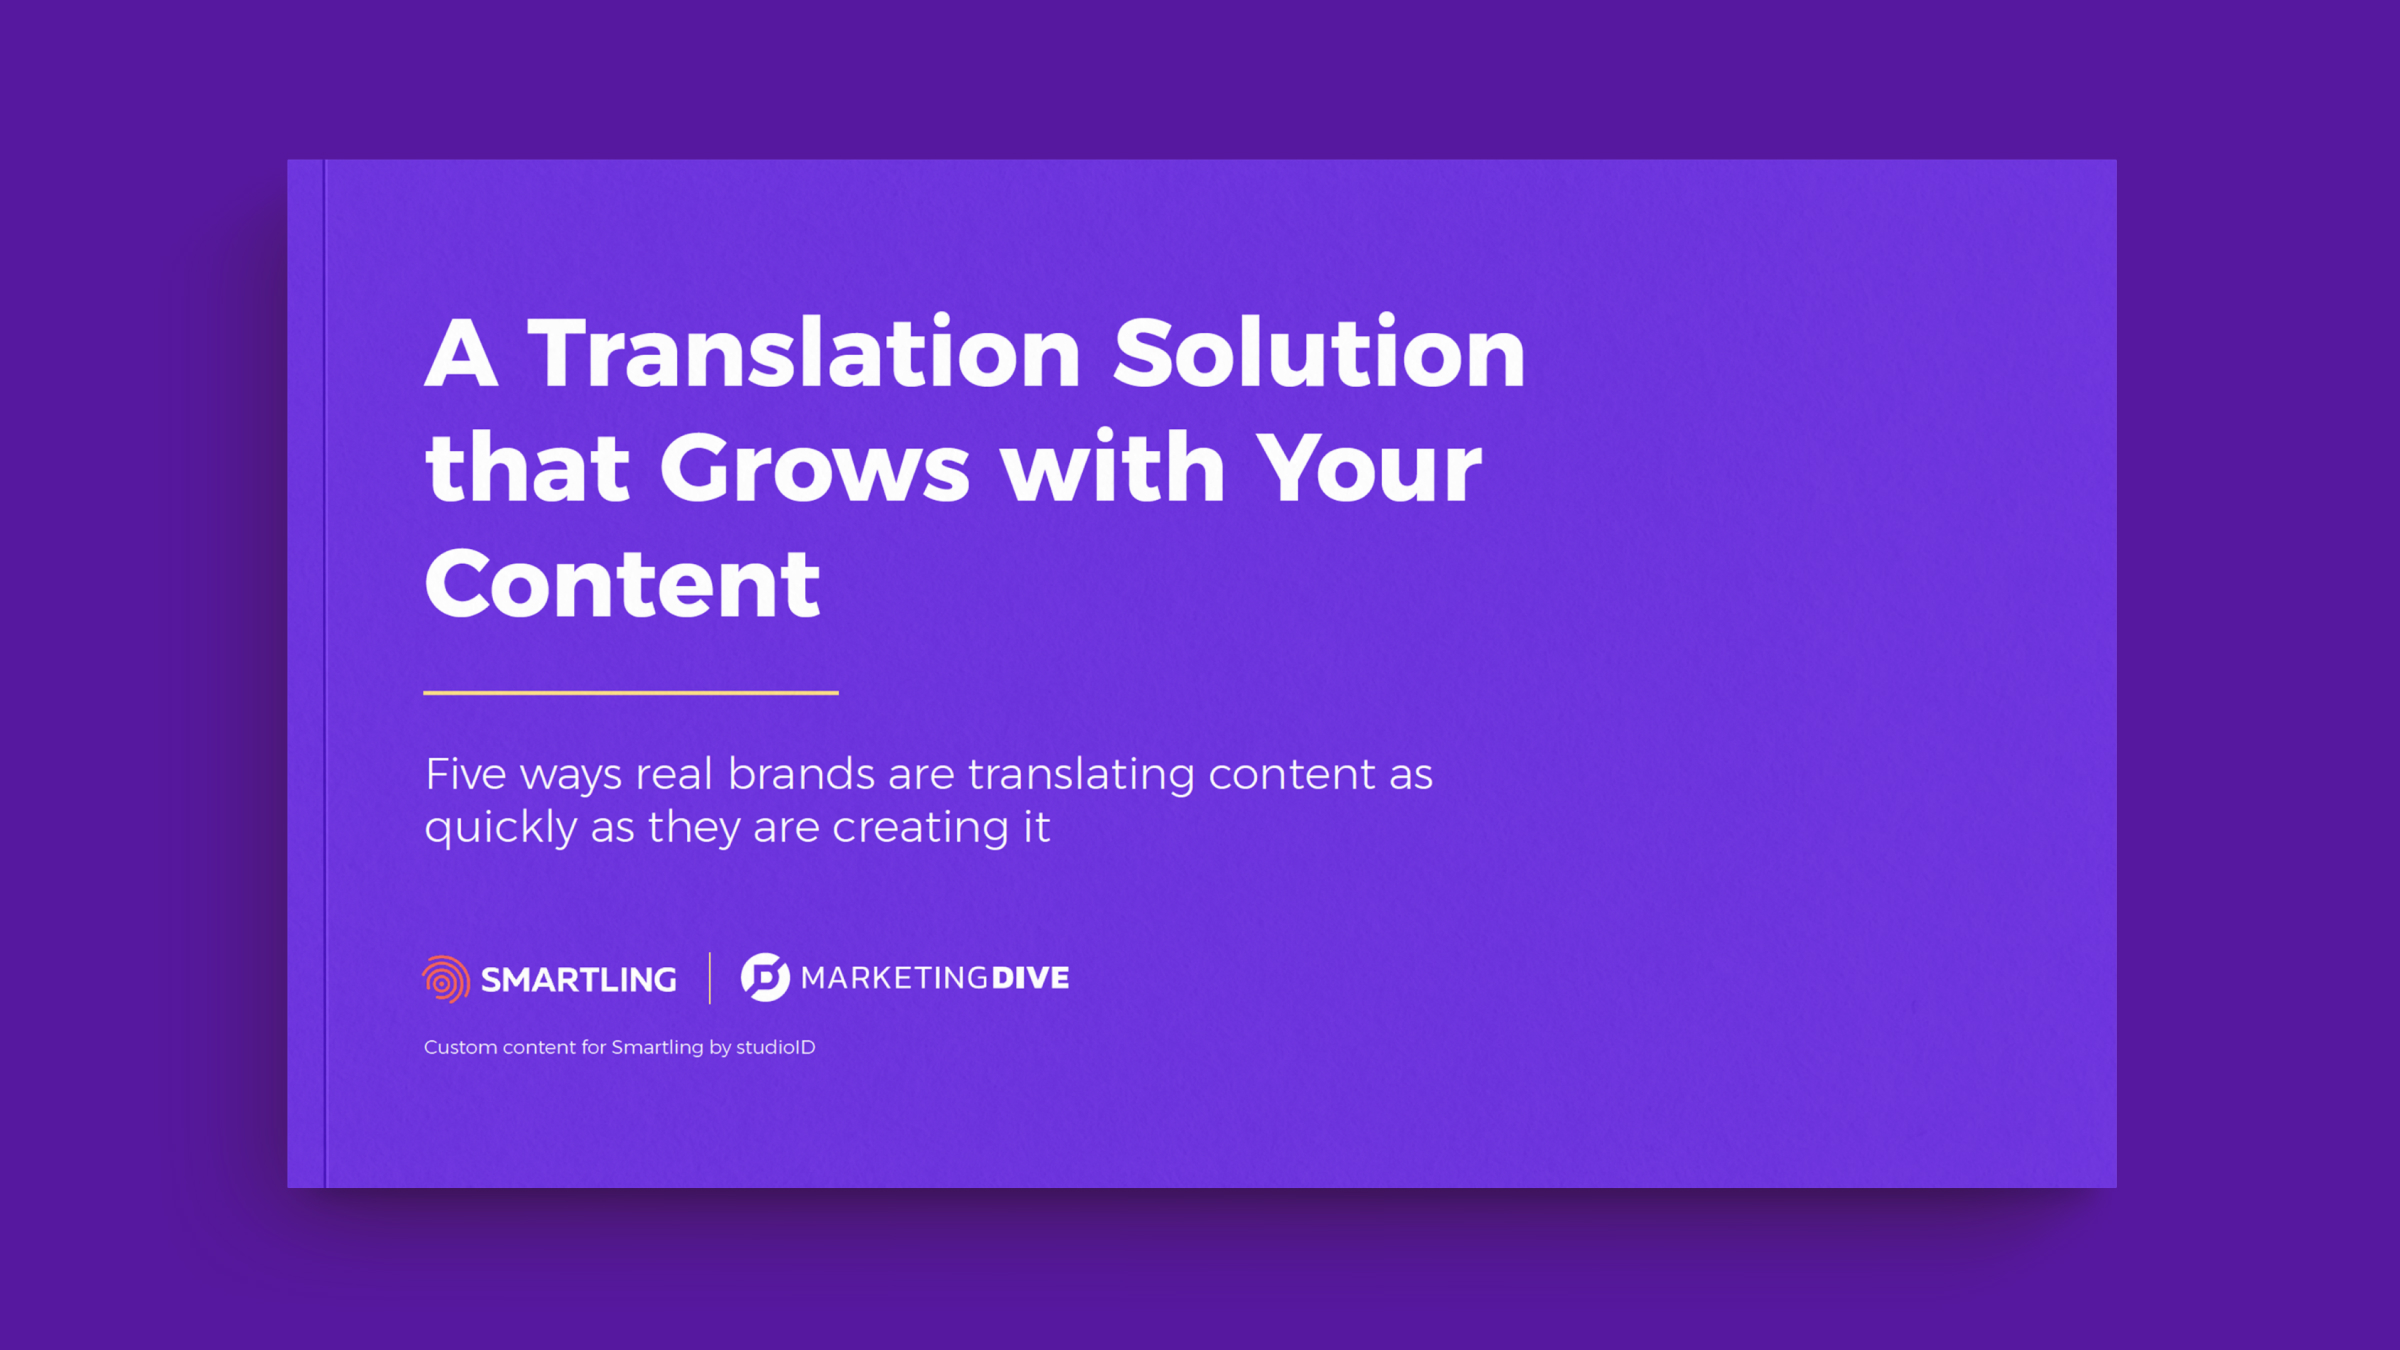 A Translation Solution That Grows With Your Content